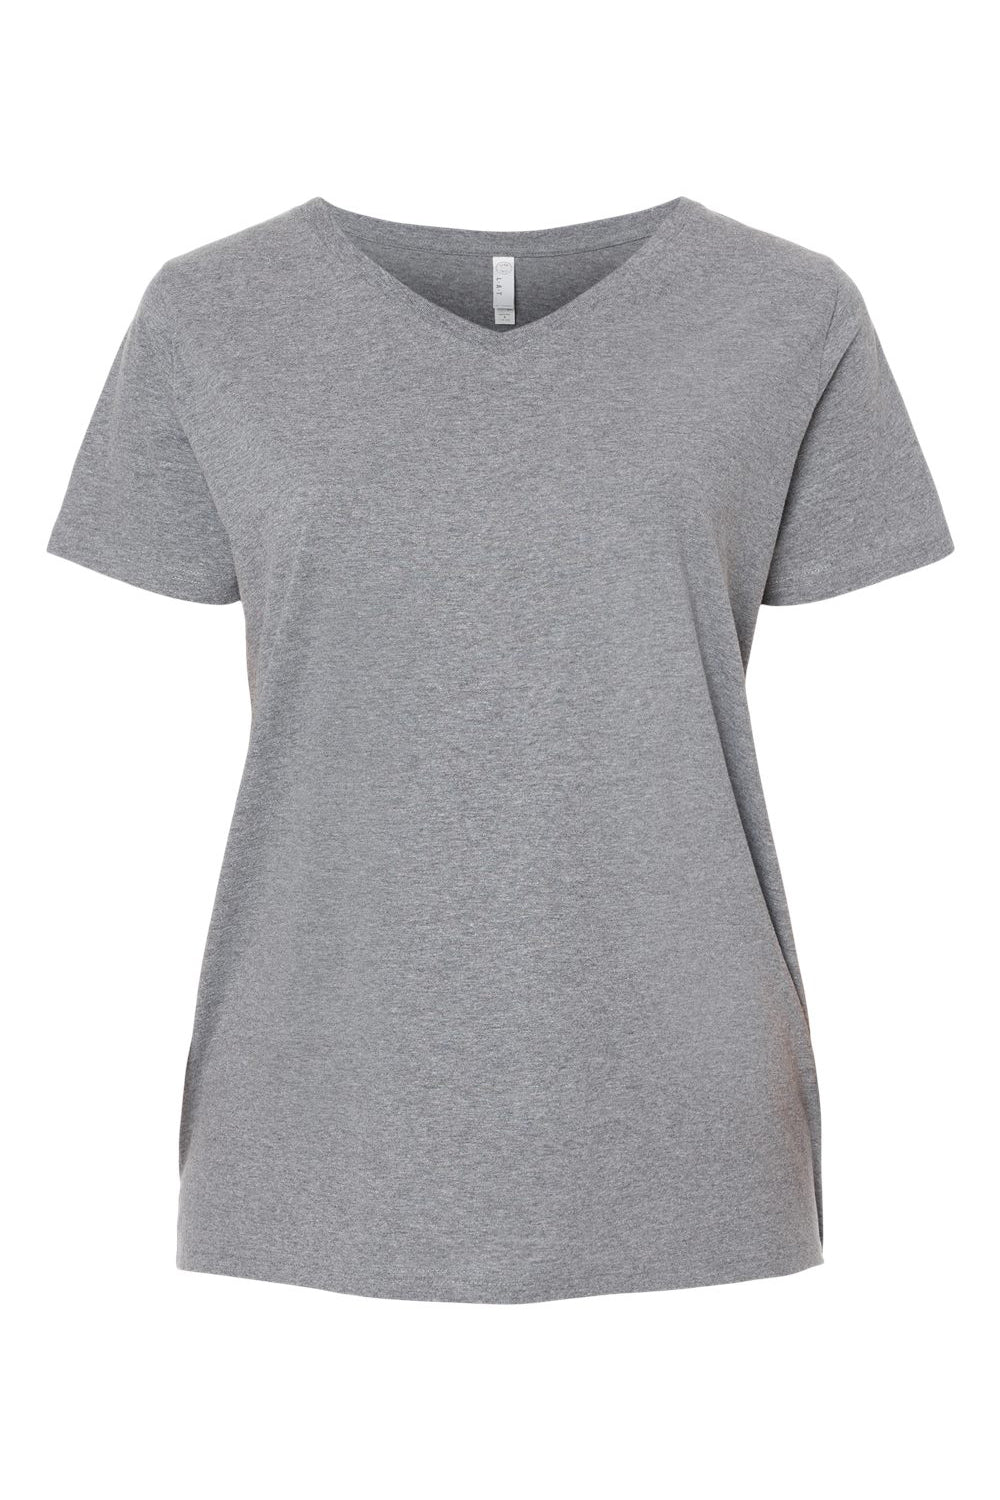 LAT 3817 Womens Curvy Collection Fine Jersey Short Sleeve V-Neck T-Shirt Heather Granite Grey Flat Front